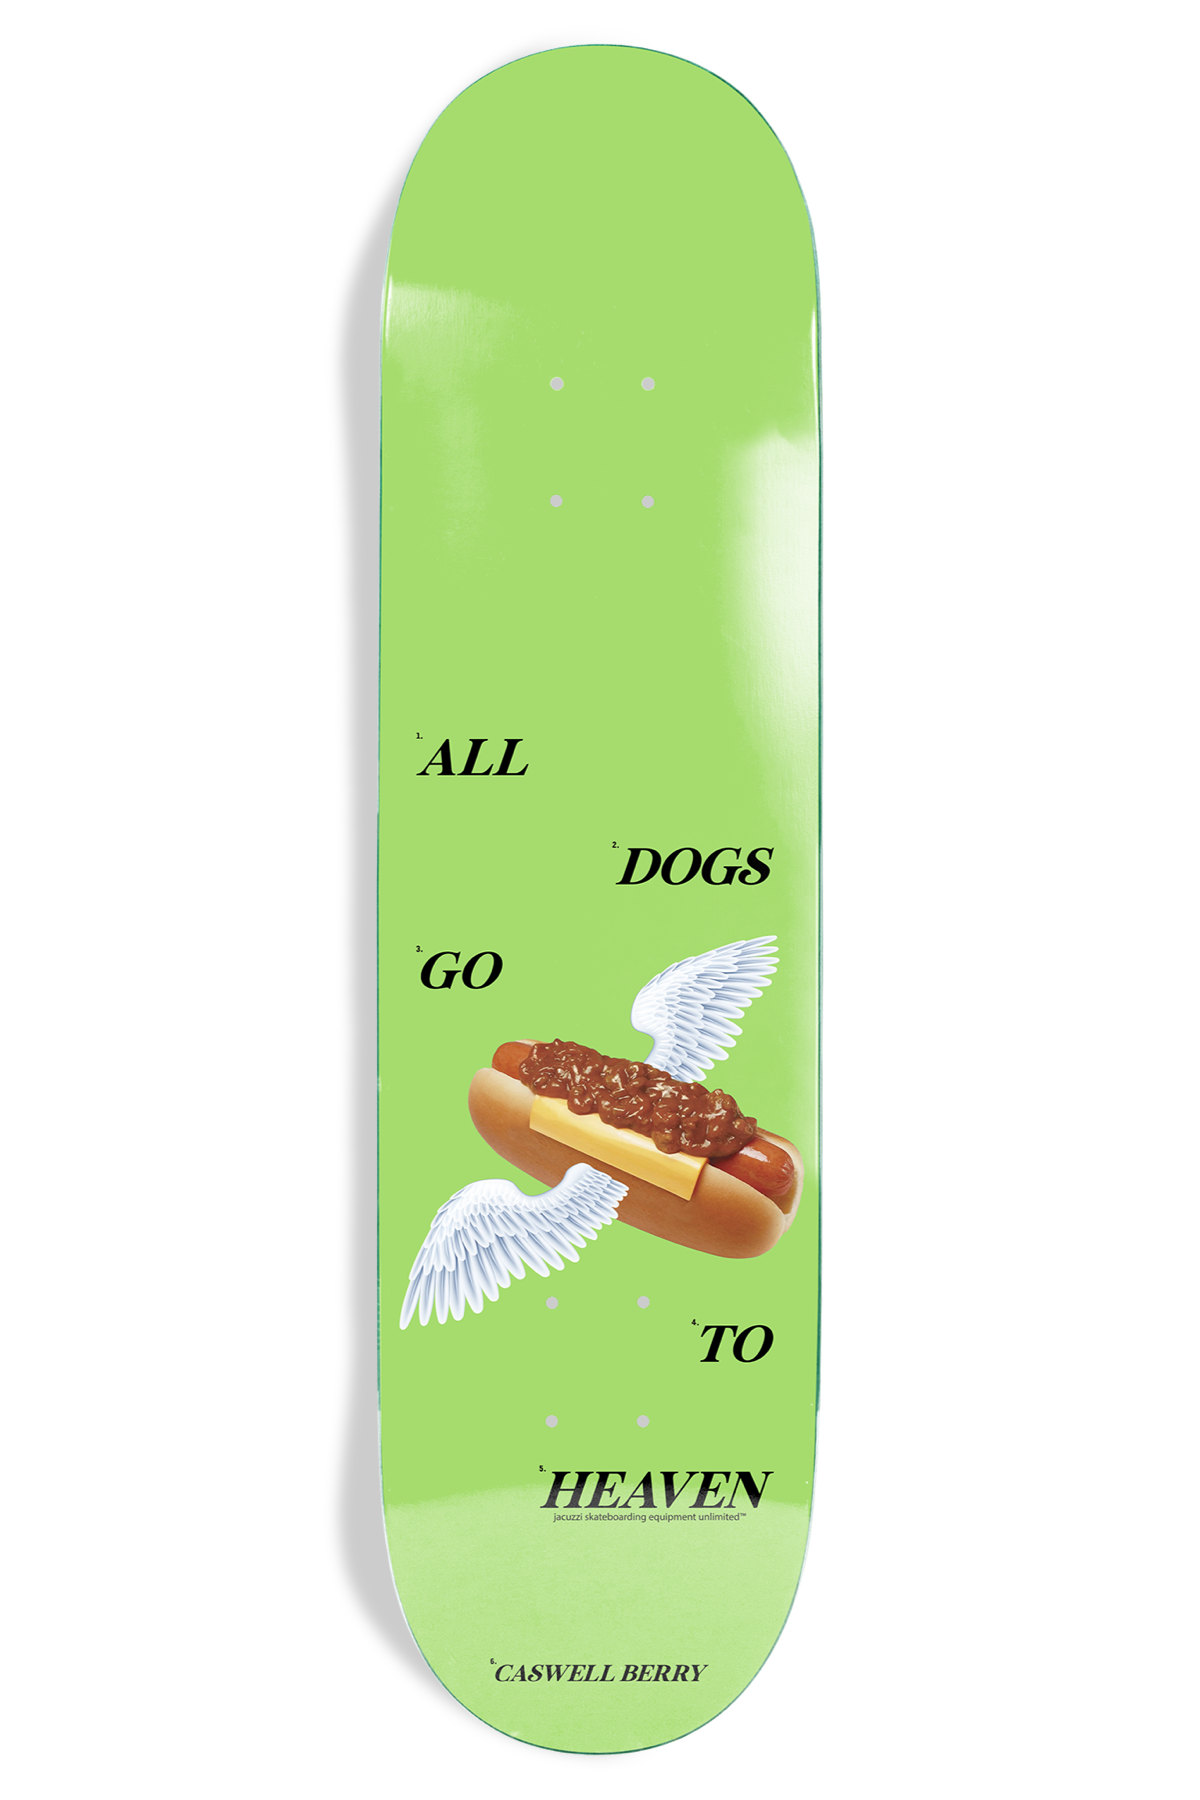 Jacuzzi Unlimited Caswell Berry Hot Dog Heaven Ex7 Skateboard Deck - 8.25"